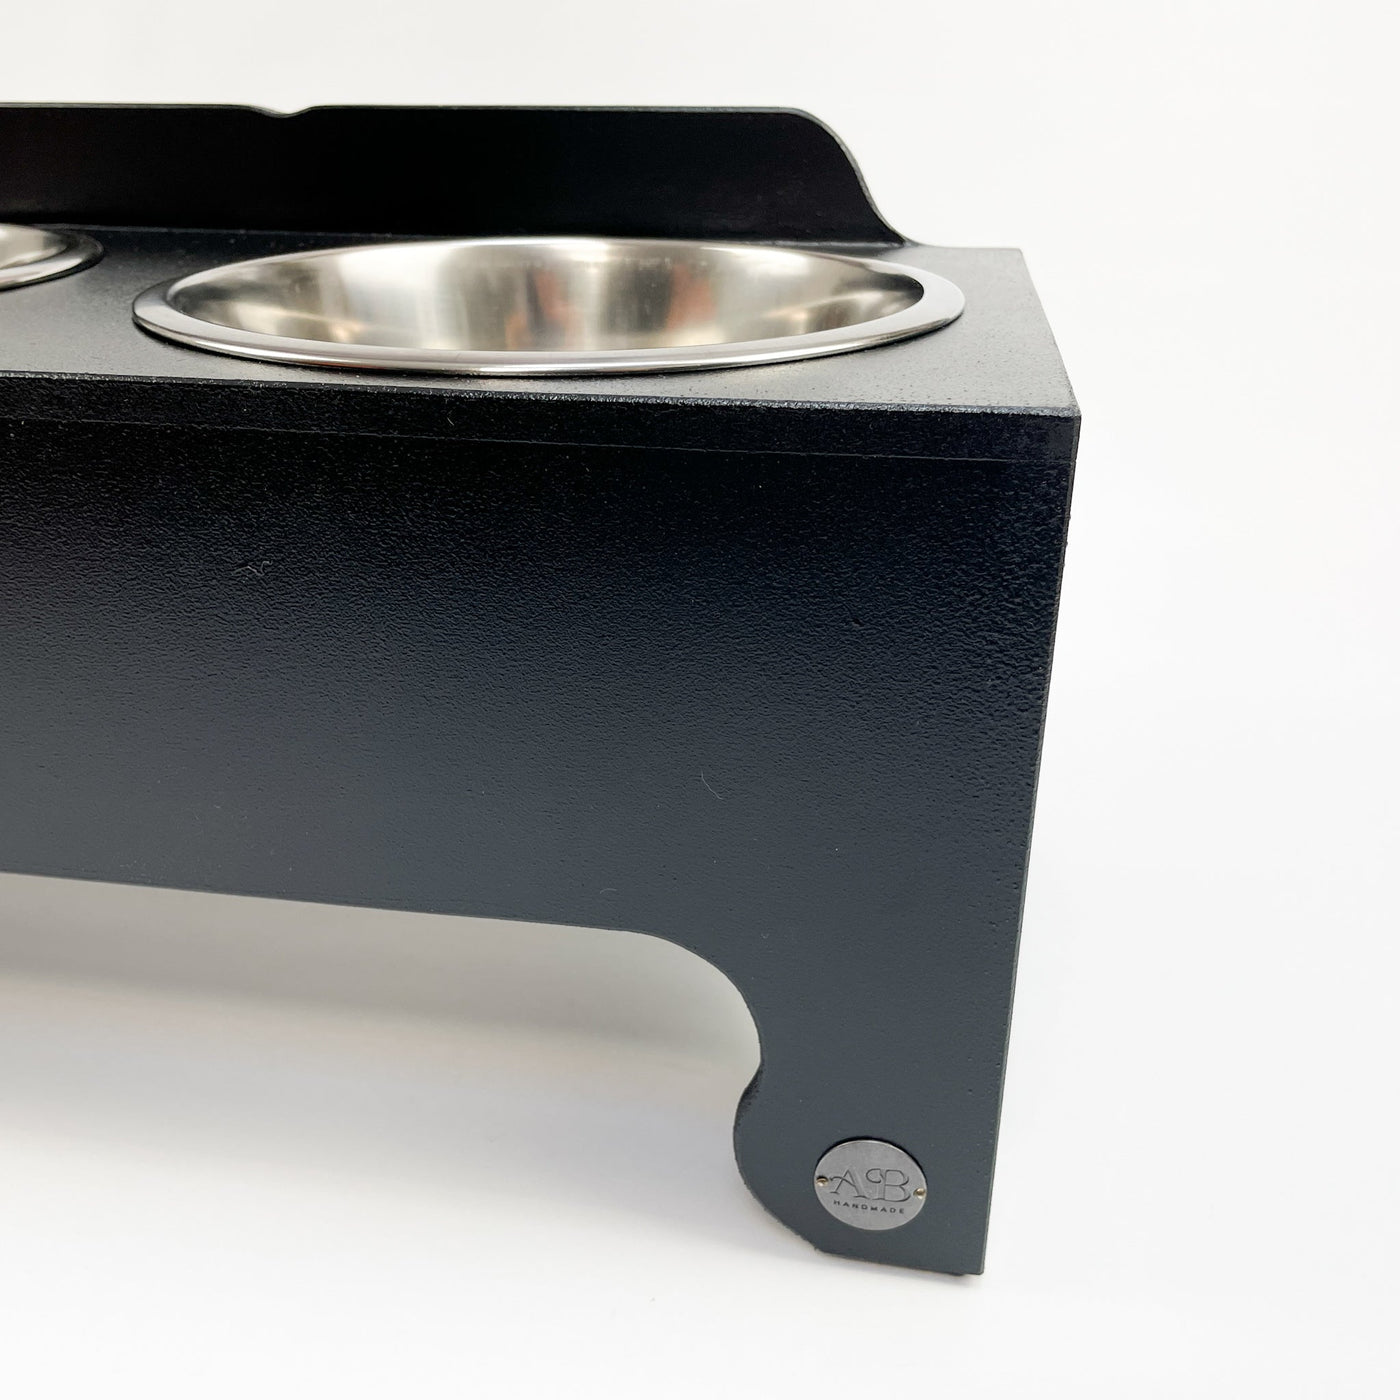 Albie's seal of quality on a black, raised dog-bowl stand